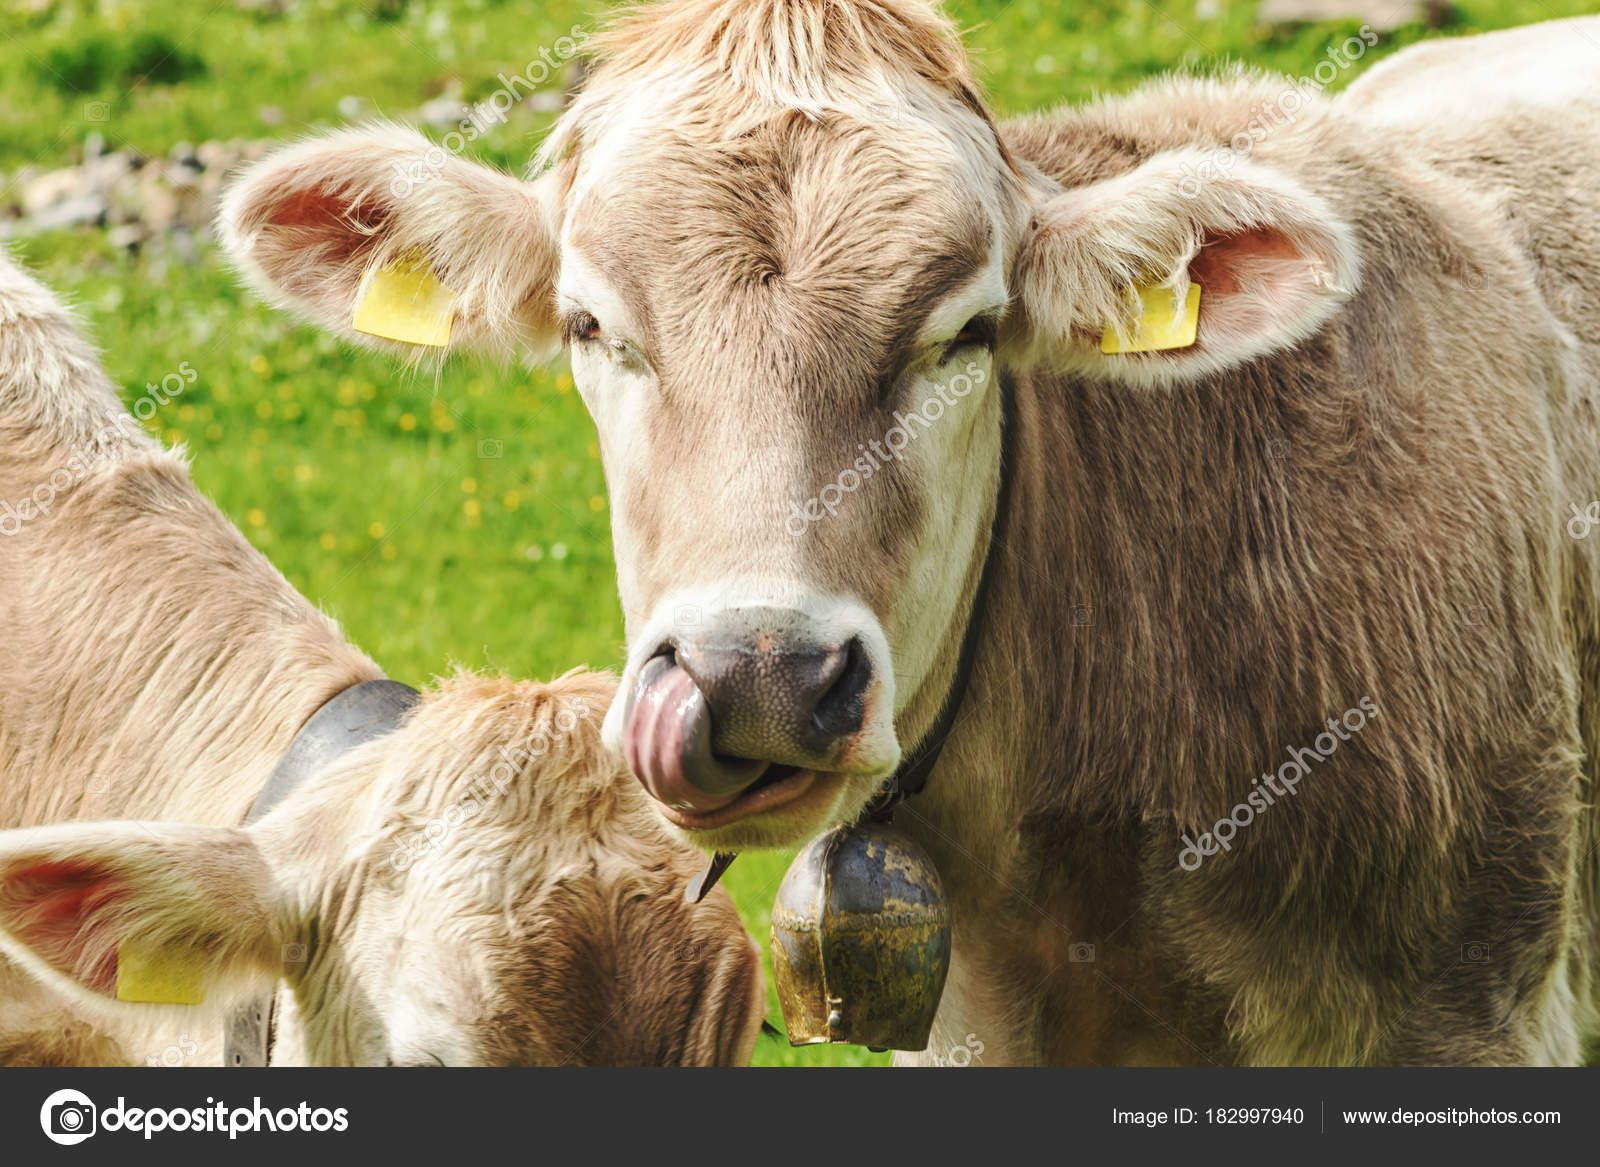 Why do cows lick their noses